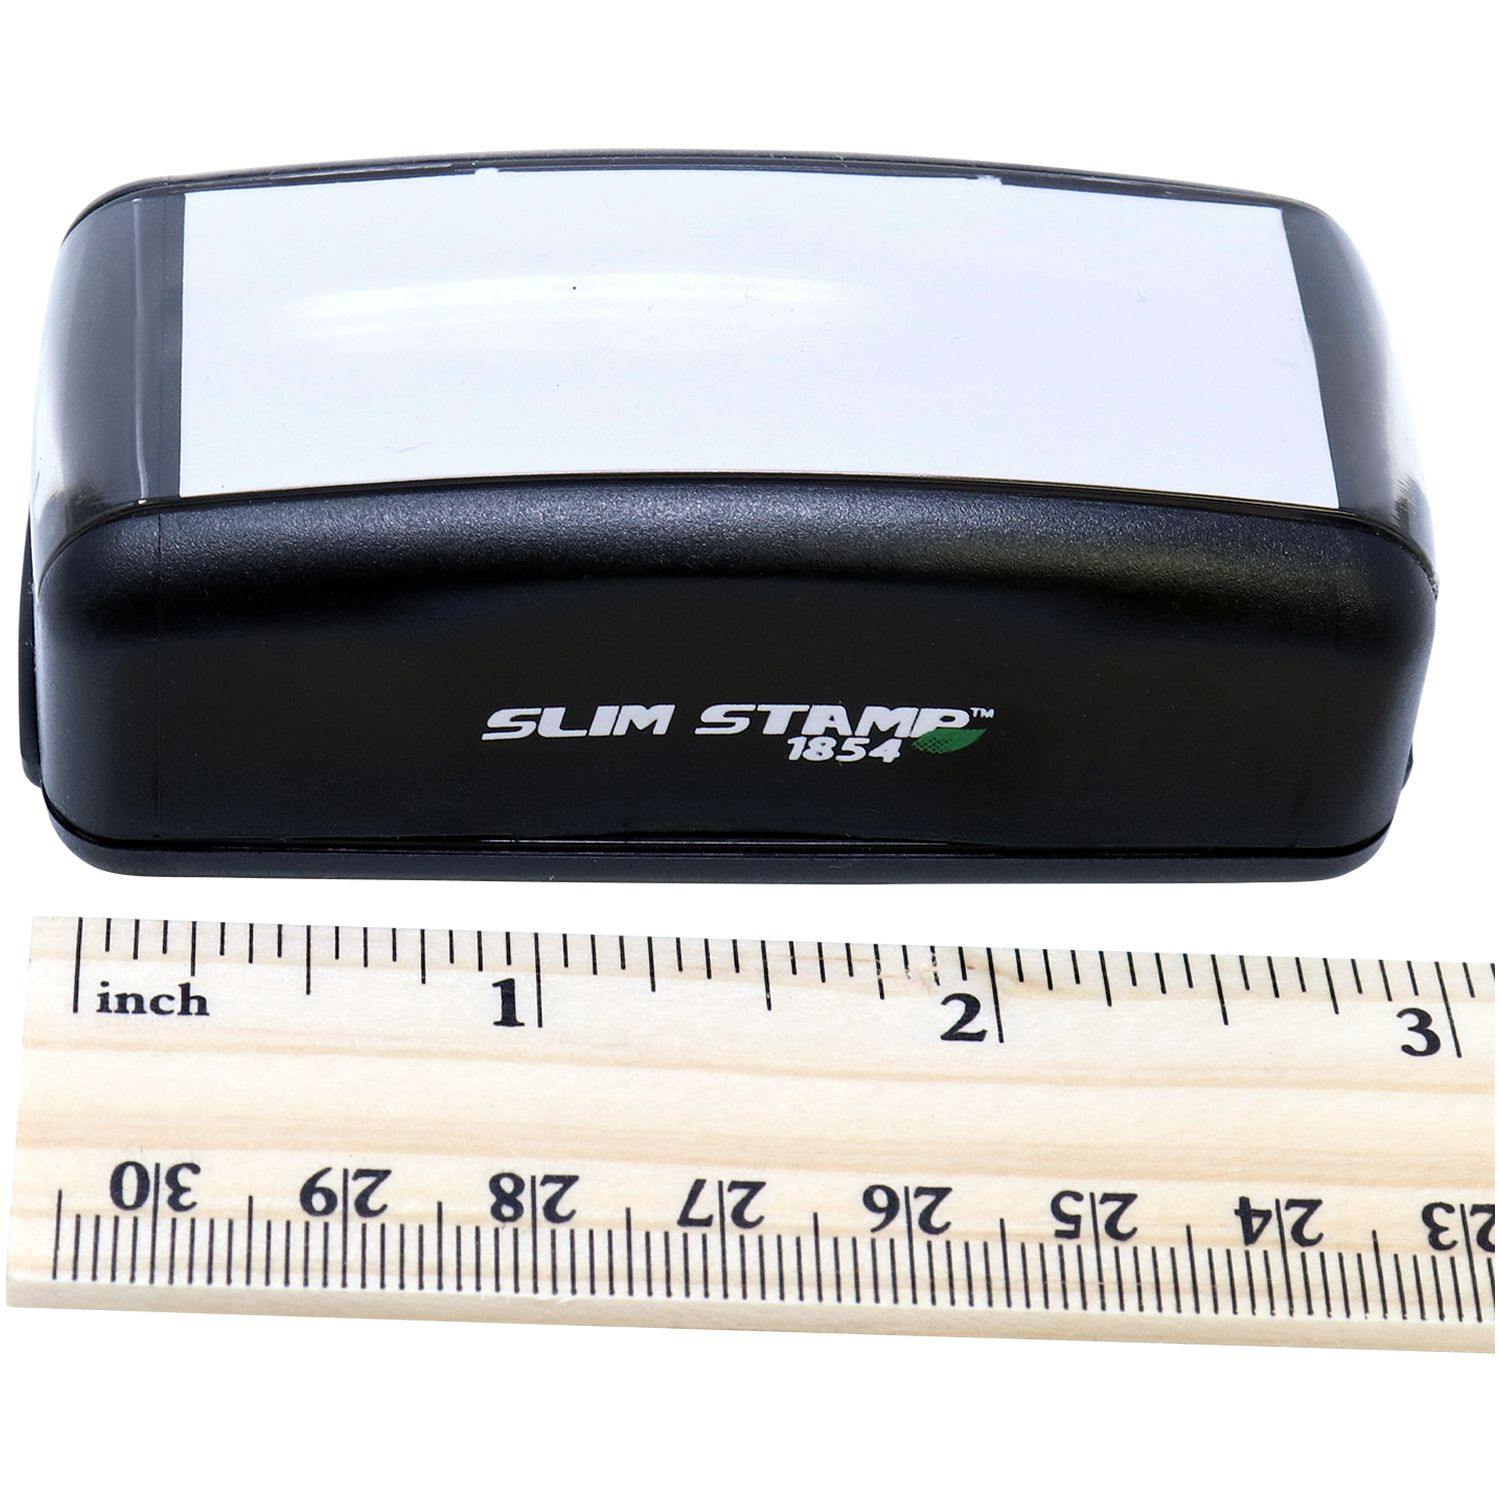 Measurement Large Pre-Inked Narrow First Class Mail Stamp with Ruler